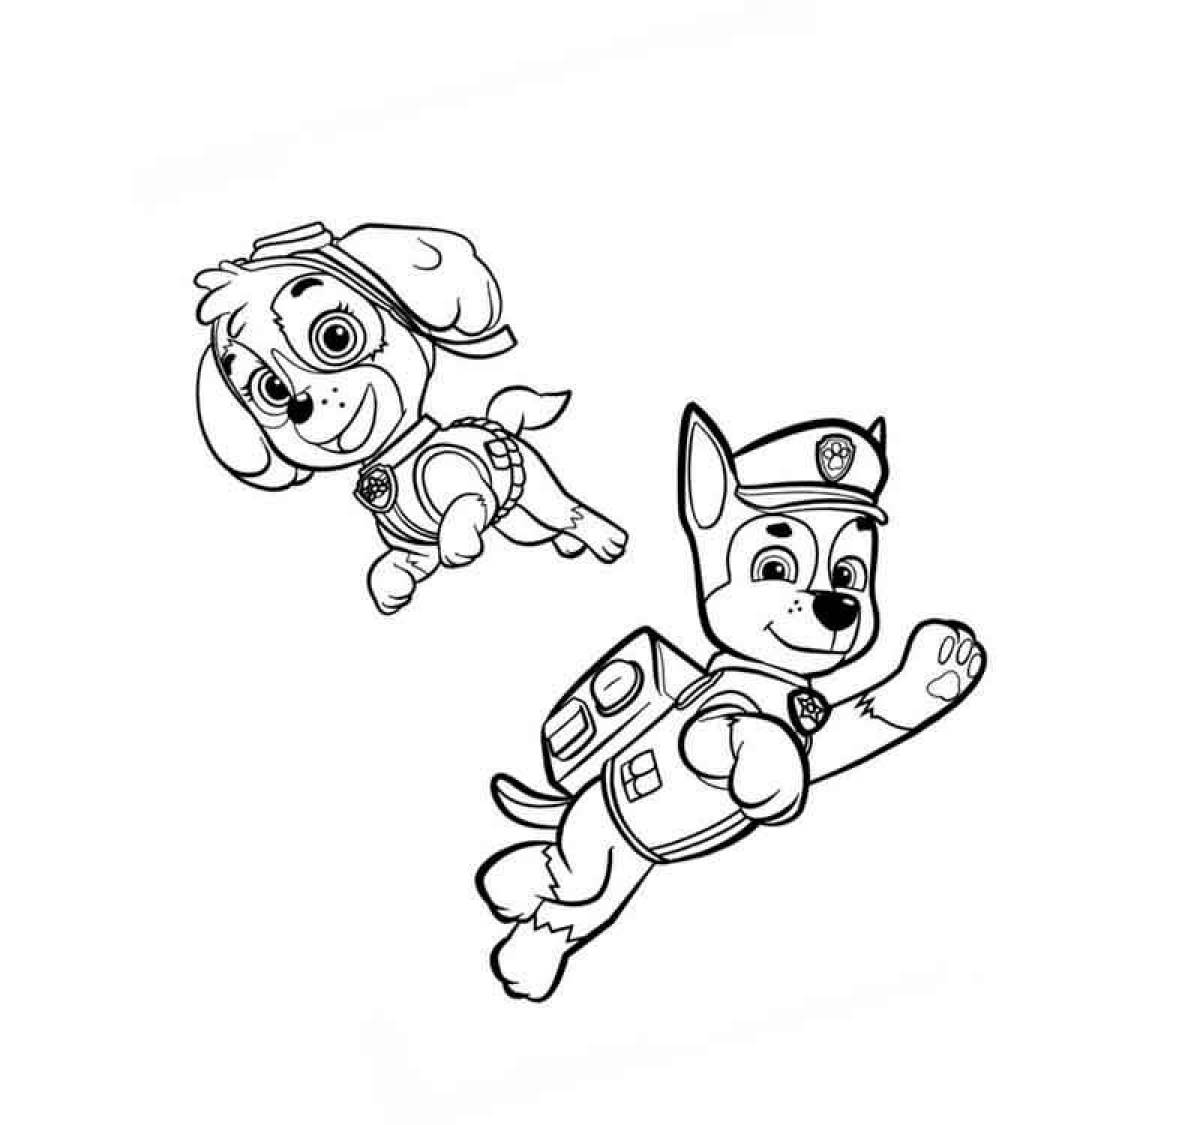 Cute rocky paw patrol coloring book